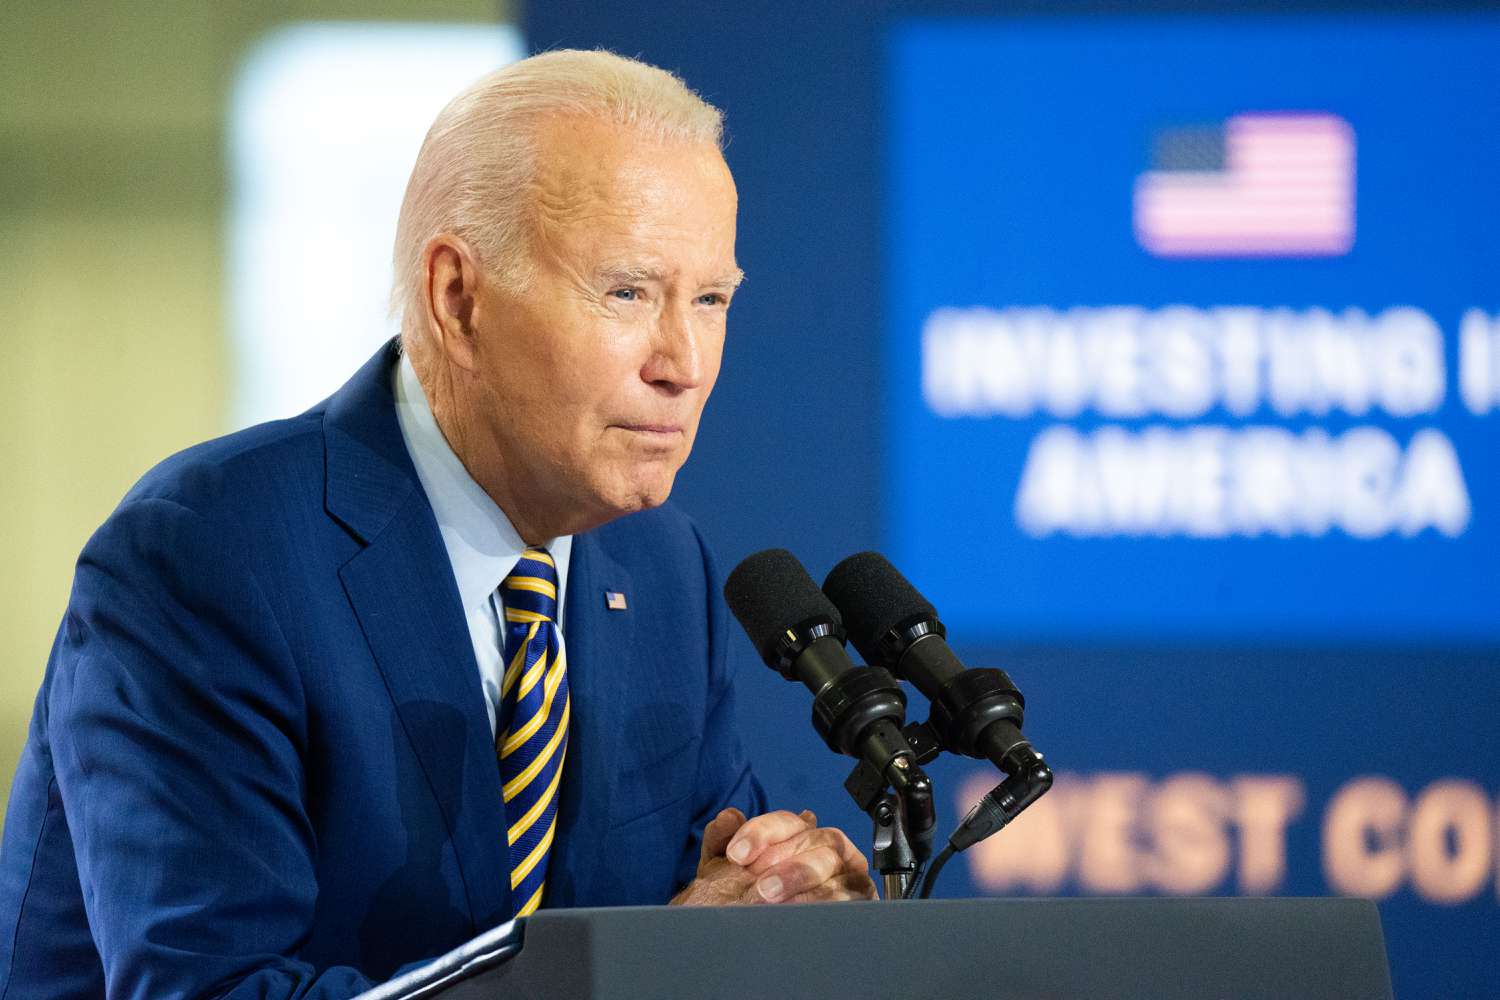 While the Trump administration positioned short-term health insurance plans as a more affordable alternative to ACA policies due to their limited benefits, the Biden administration has referred to them as "junk insurance." (Photo: Investopedia)